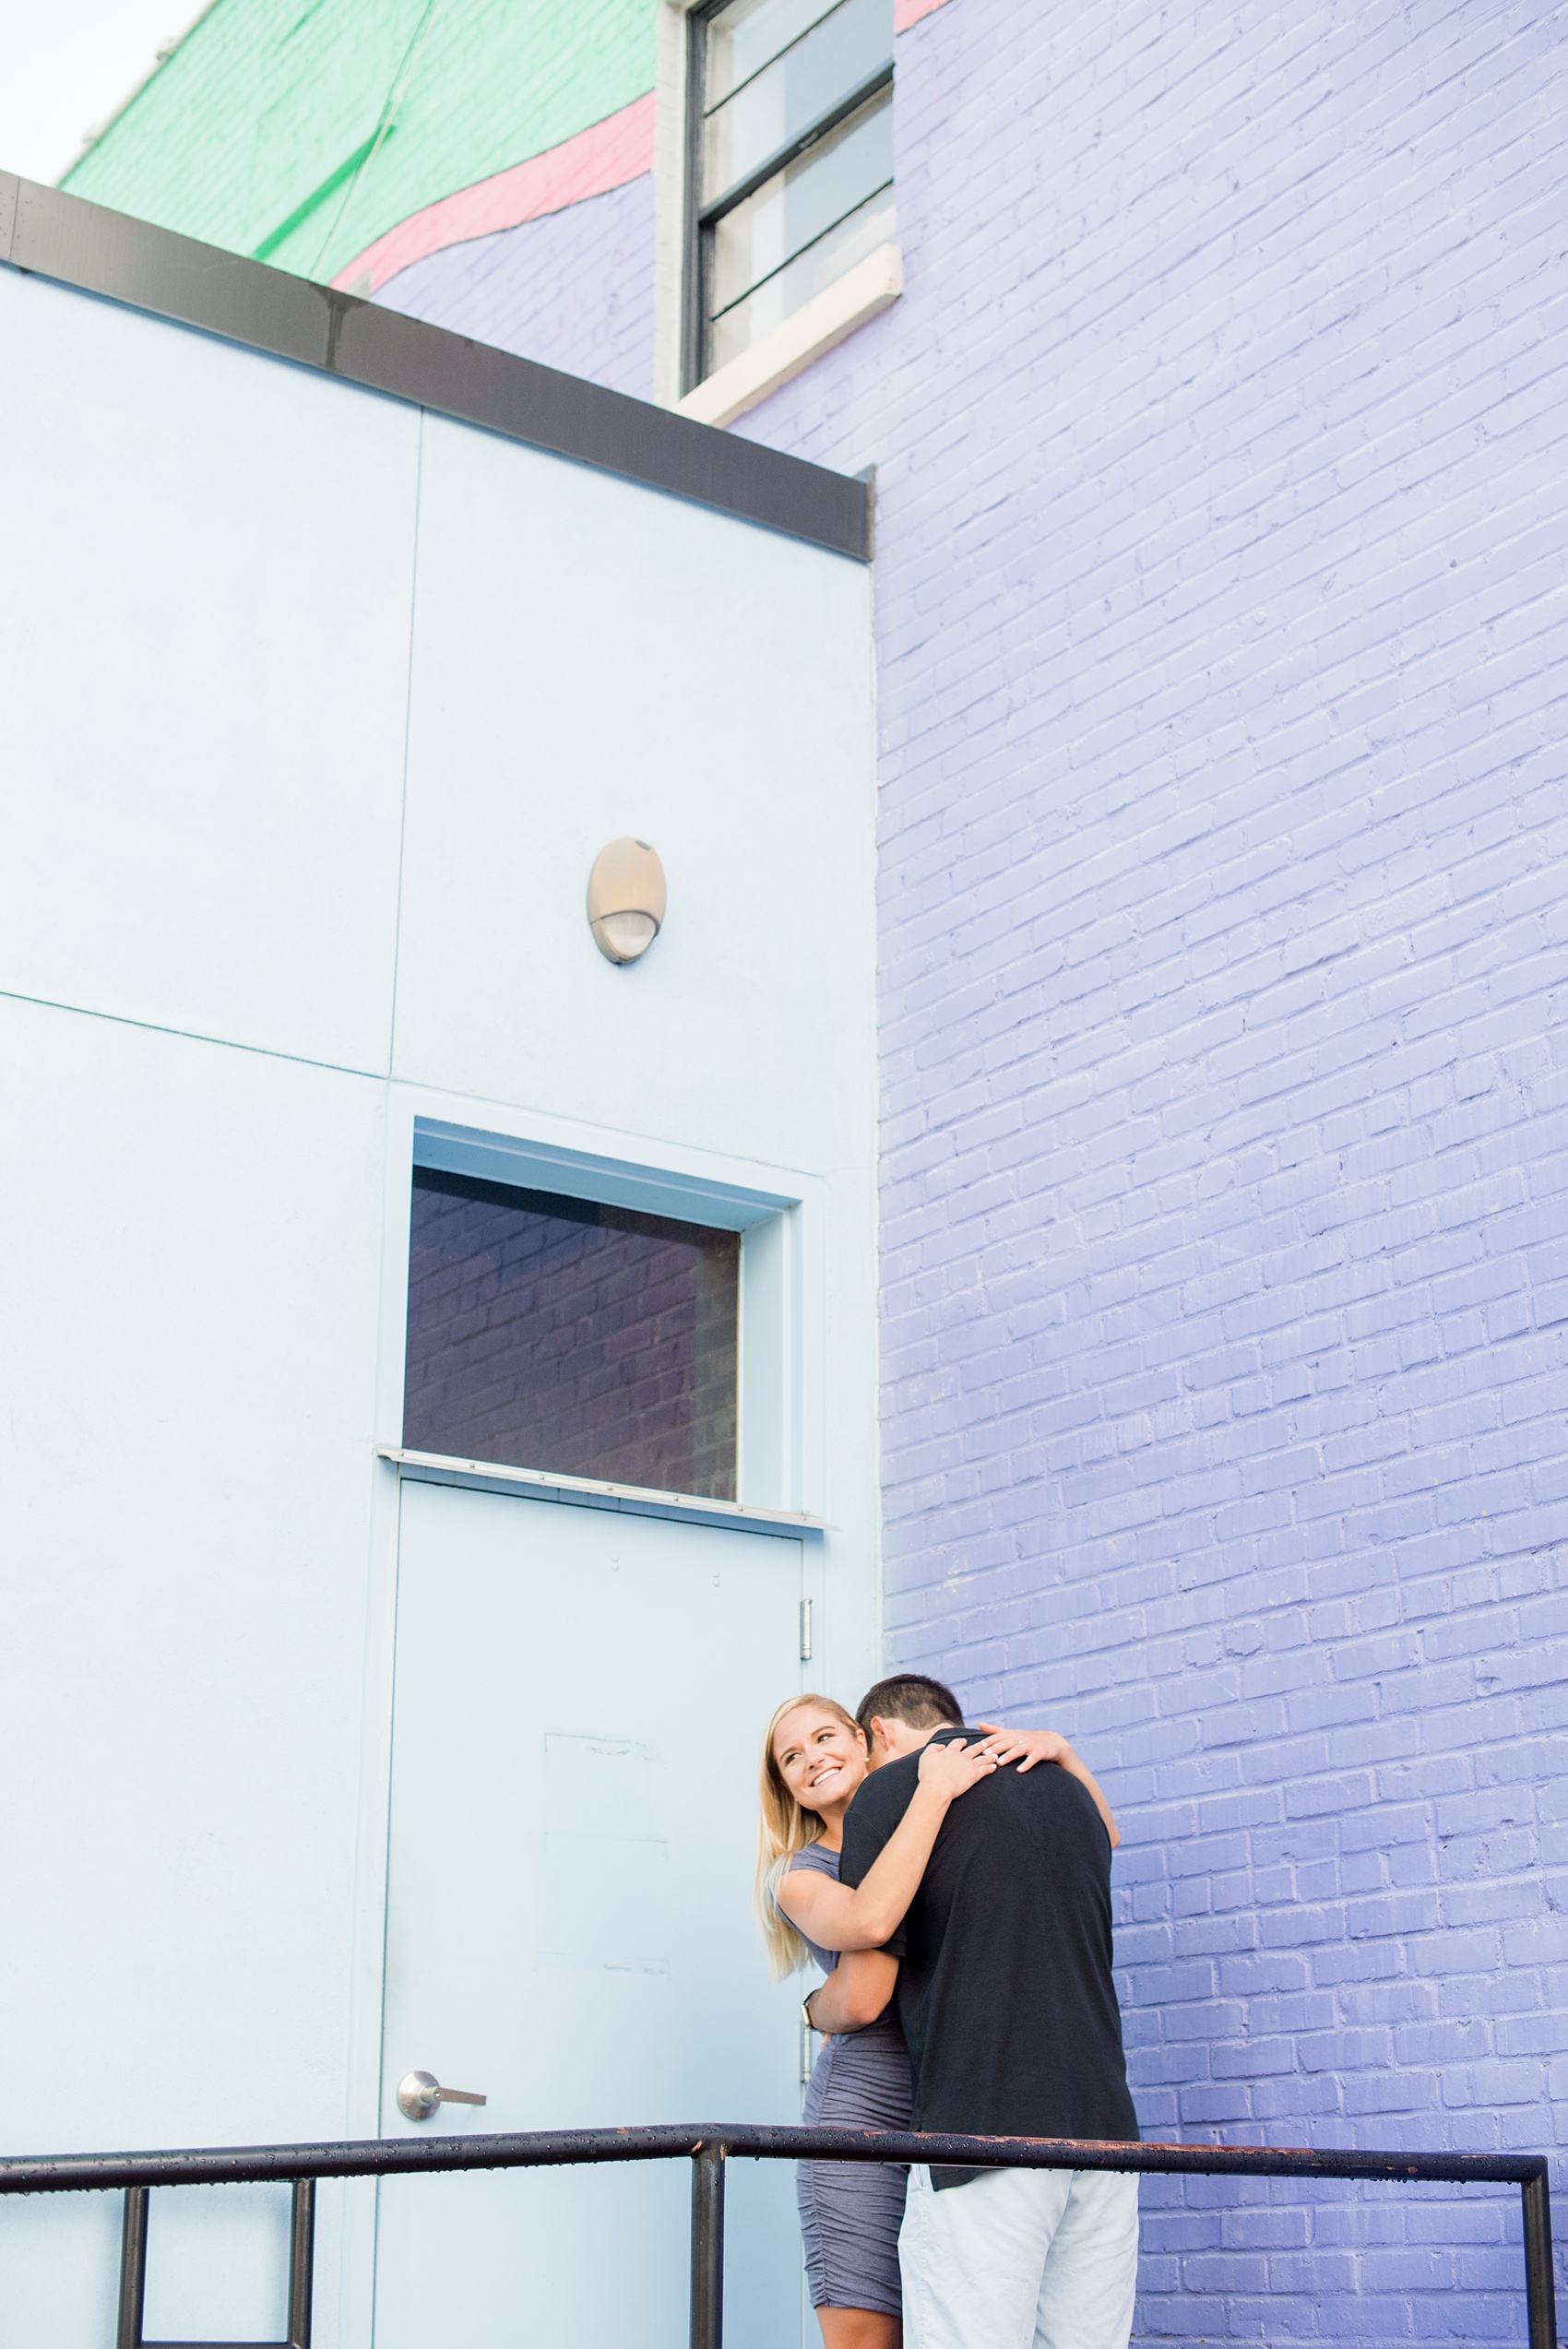 Mikkel Paige Photography pictures of a colorful engagement session in Chapel Hill North Carolina. The bride and groom hug in front of purple and light blue walls.